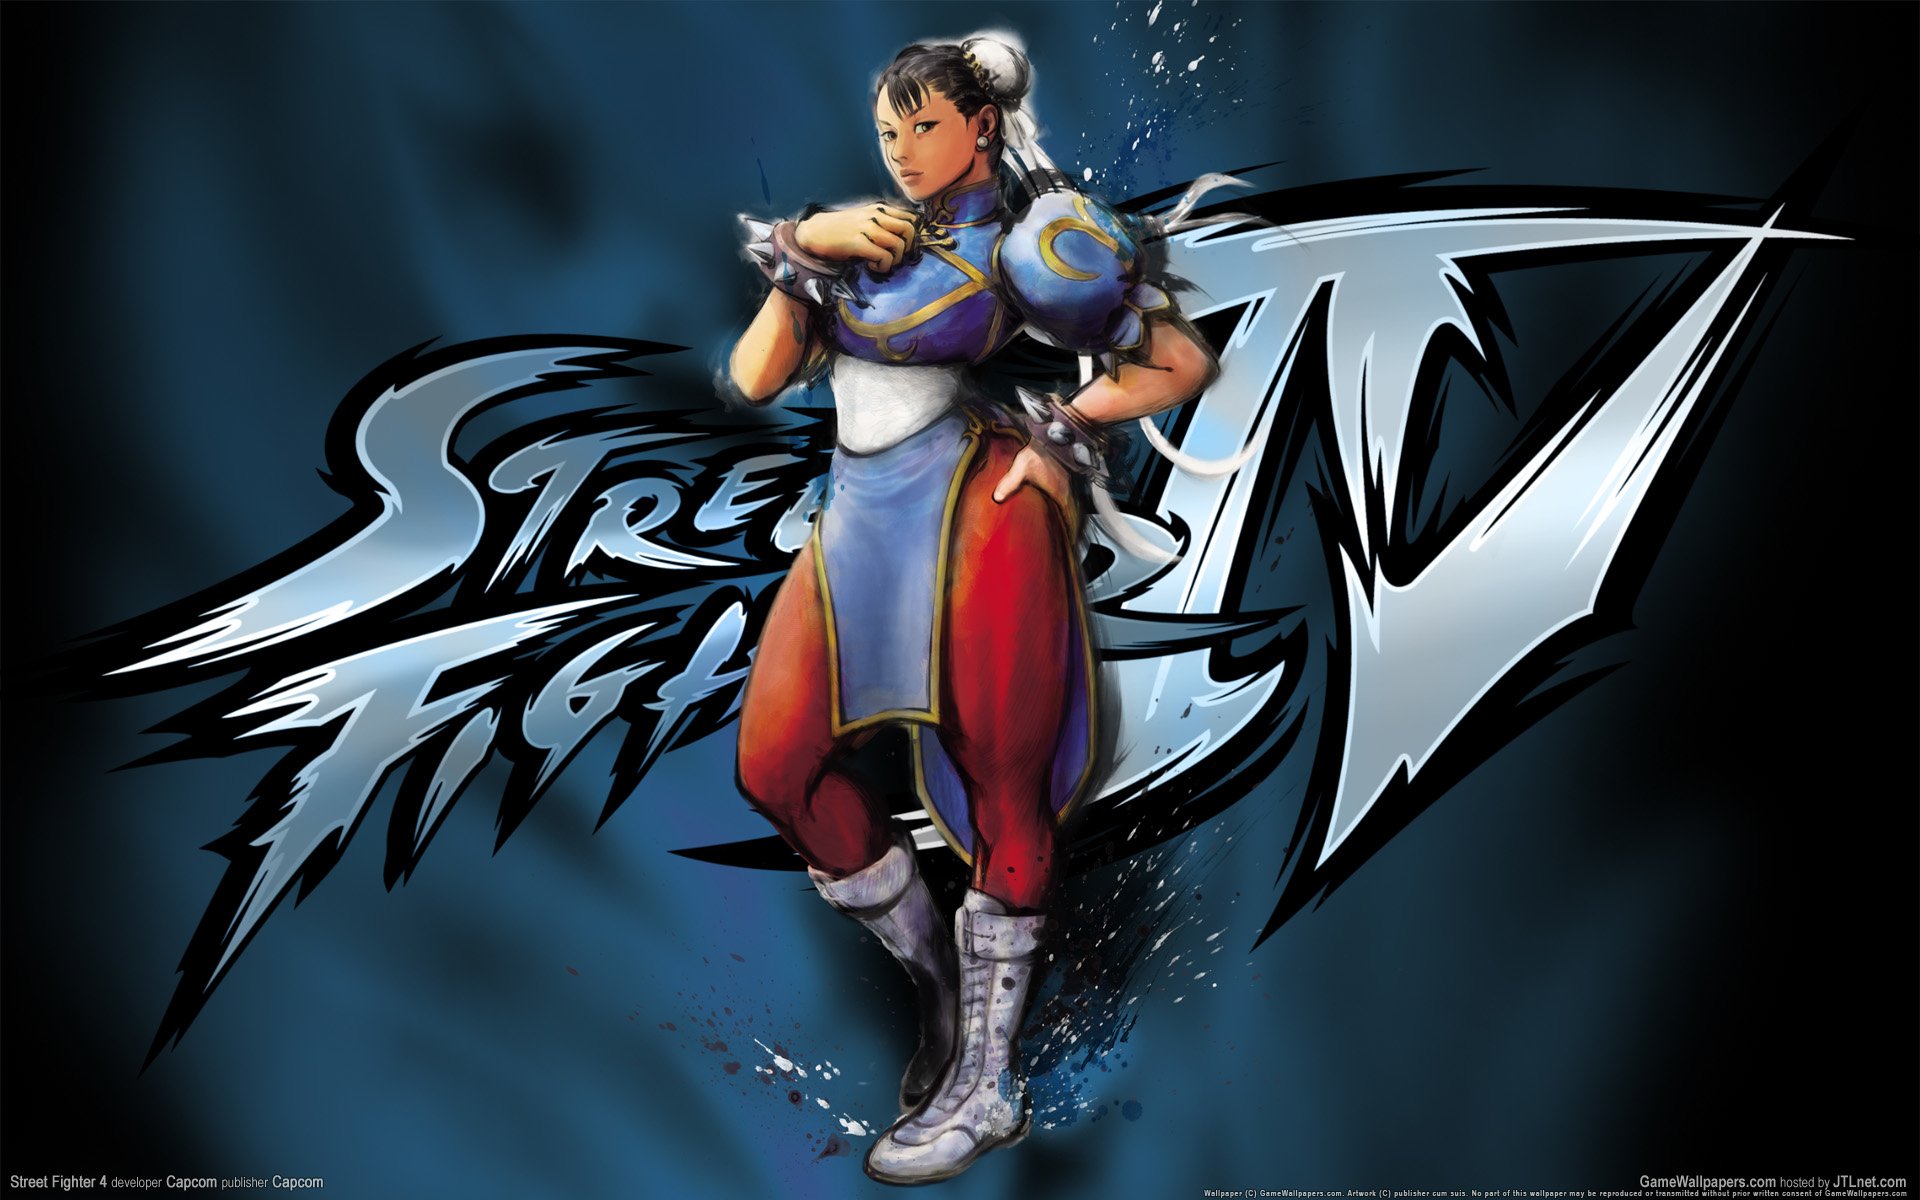 street fighter iphone wallpaper,action figure,cg artwork,fictional character,illustration,games